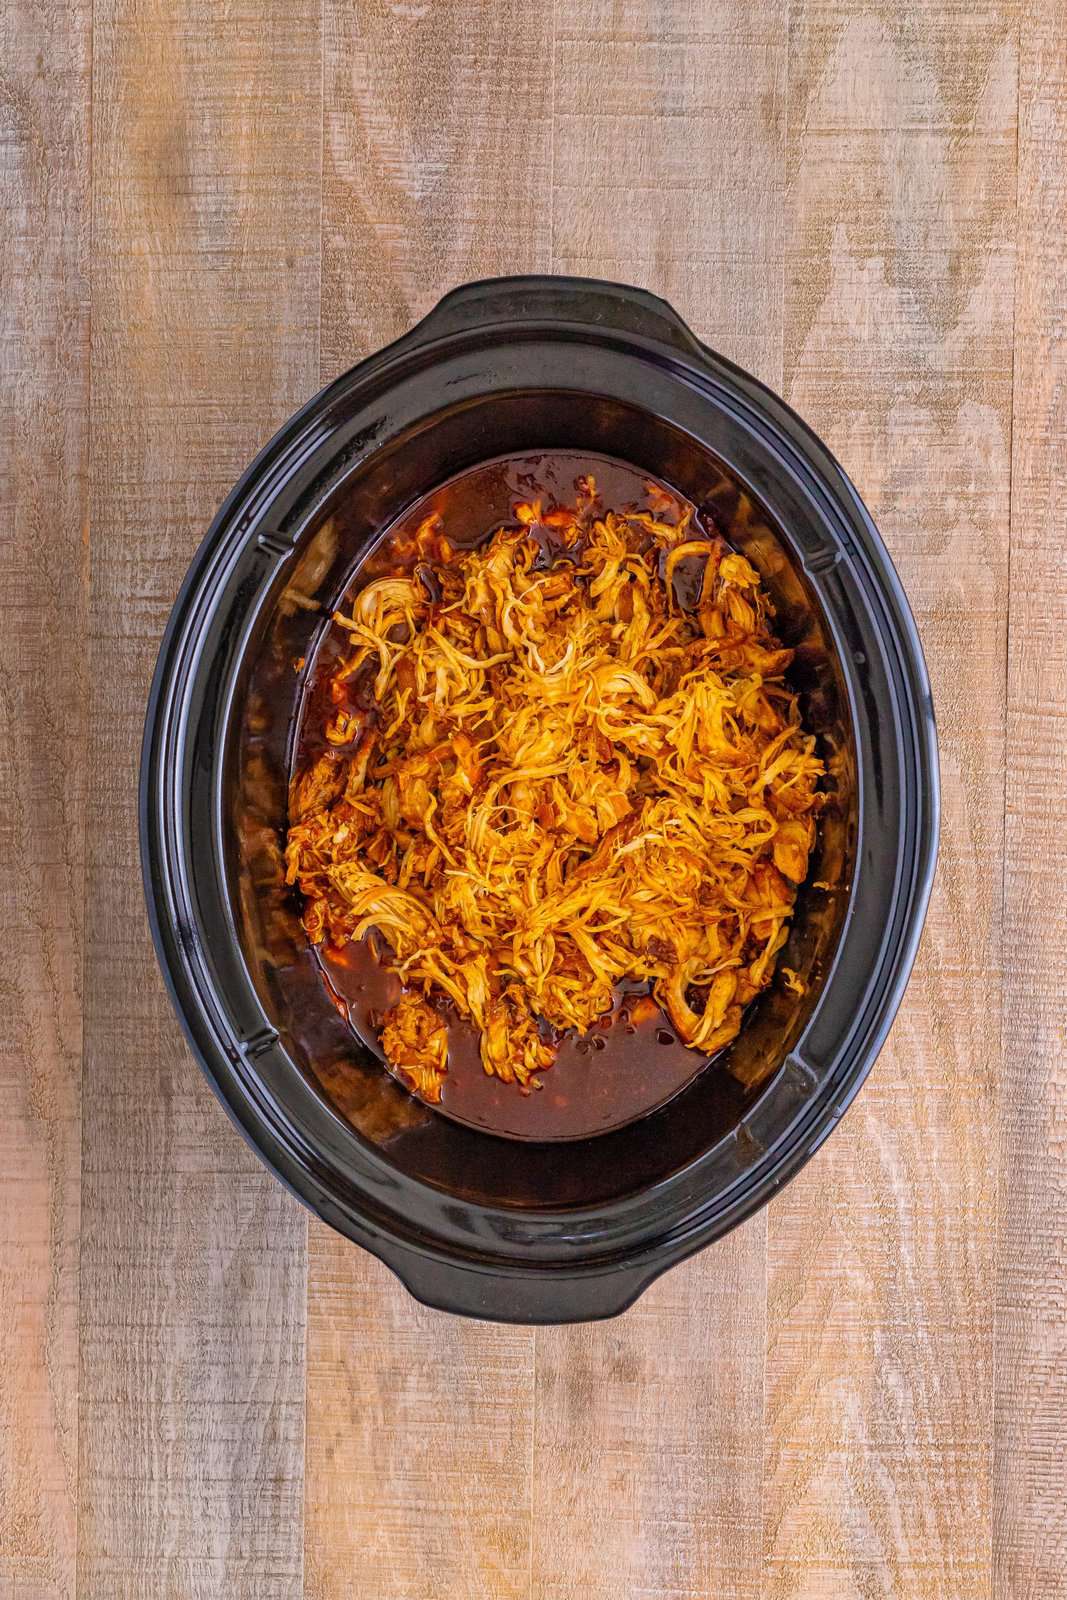 shredded chicken added back to the slow cooker. 